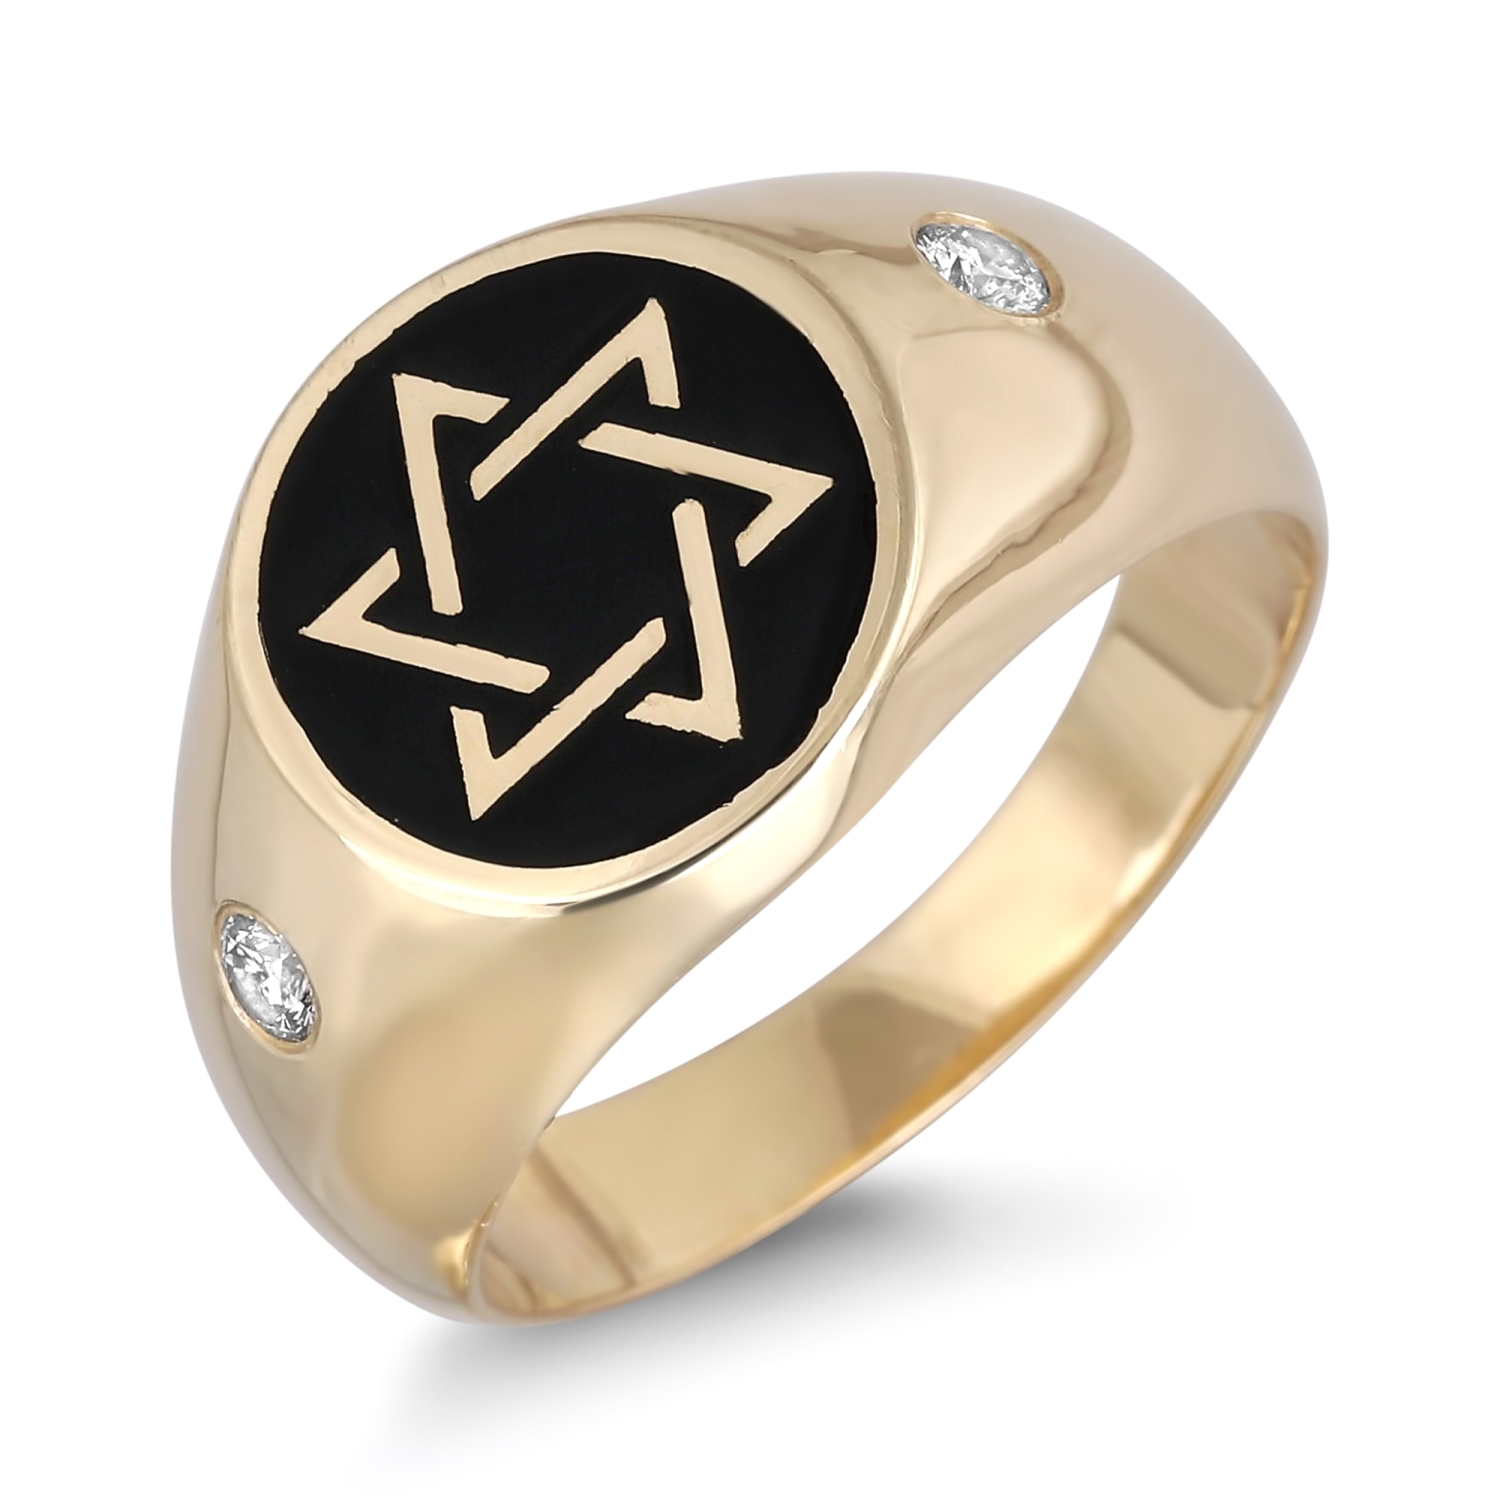 14K Yellow Gold and Black Enamel Star of David Ring with Diamond Stones - 1